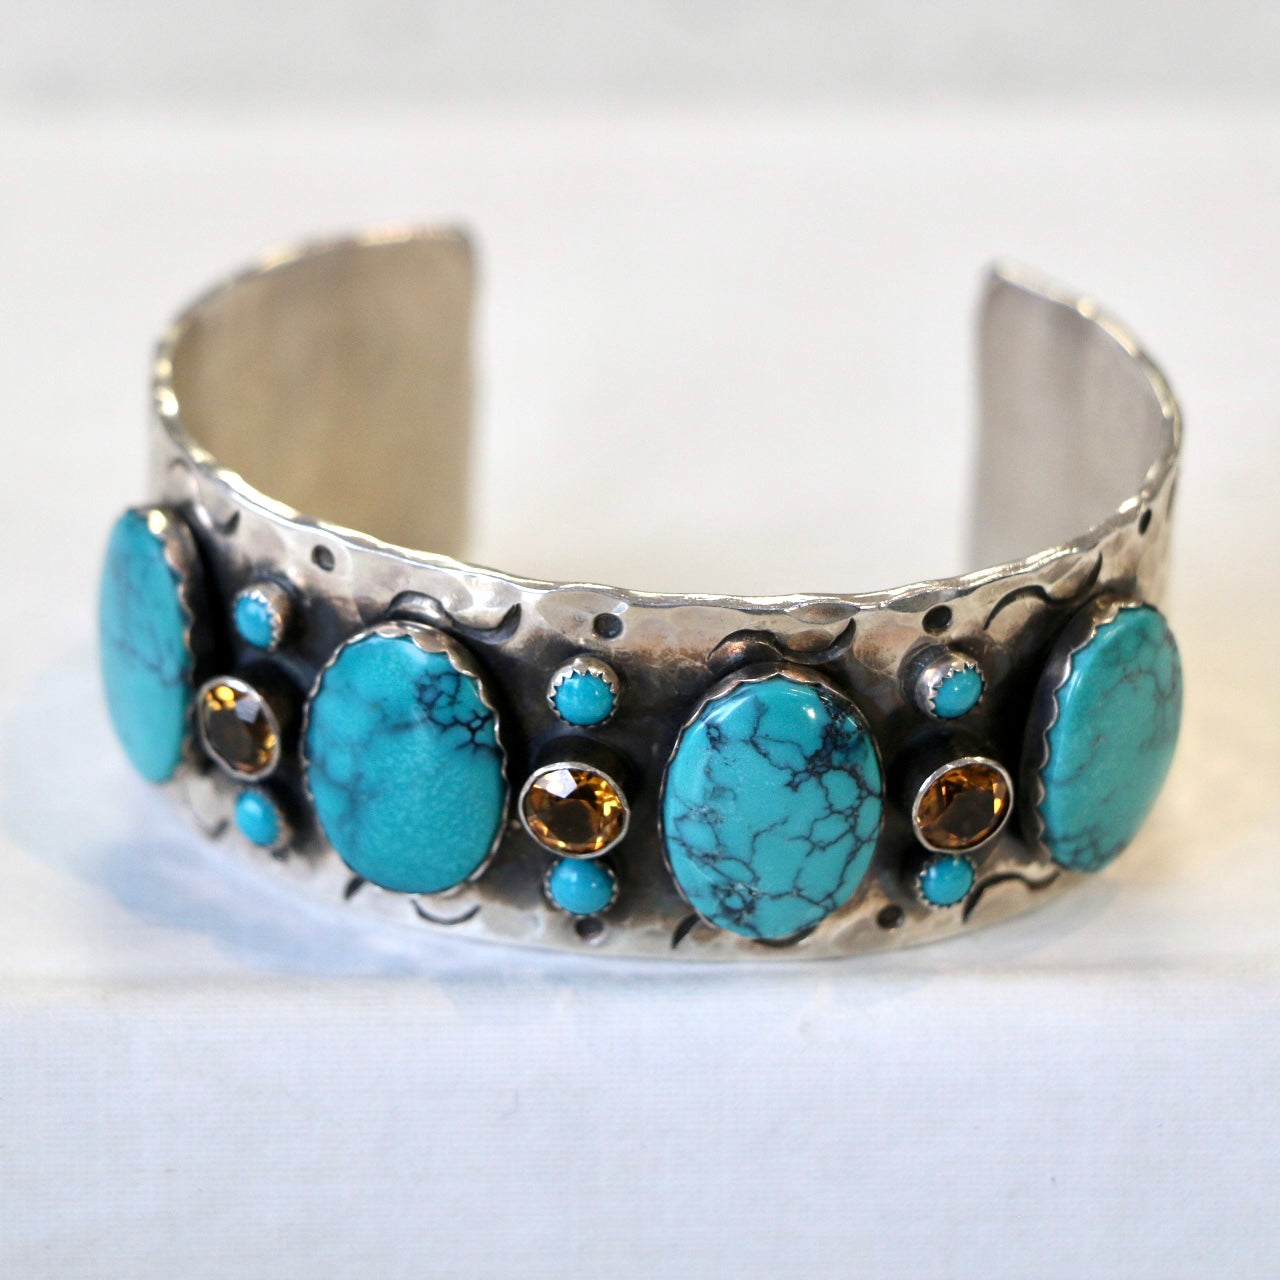 1” Stamped Sterling Cuff with Turquoise and Citrine Cuffs Richard Schmidt   